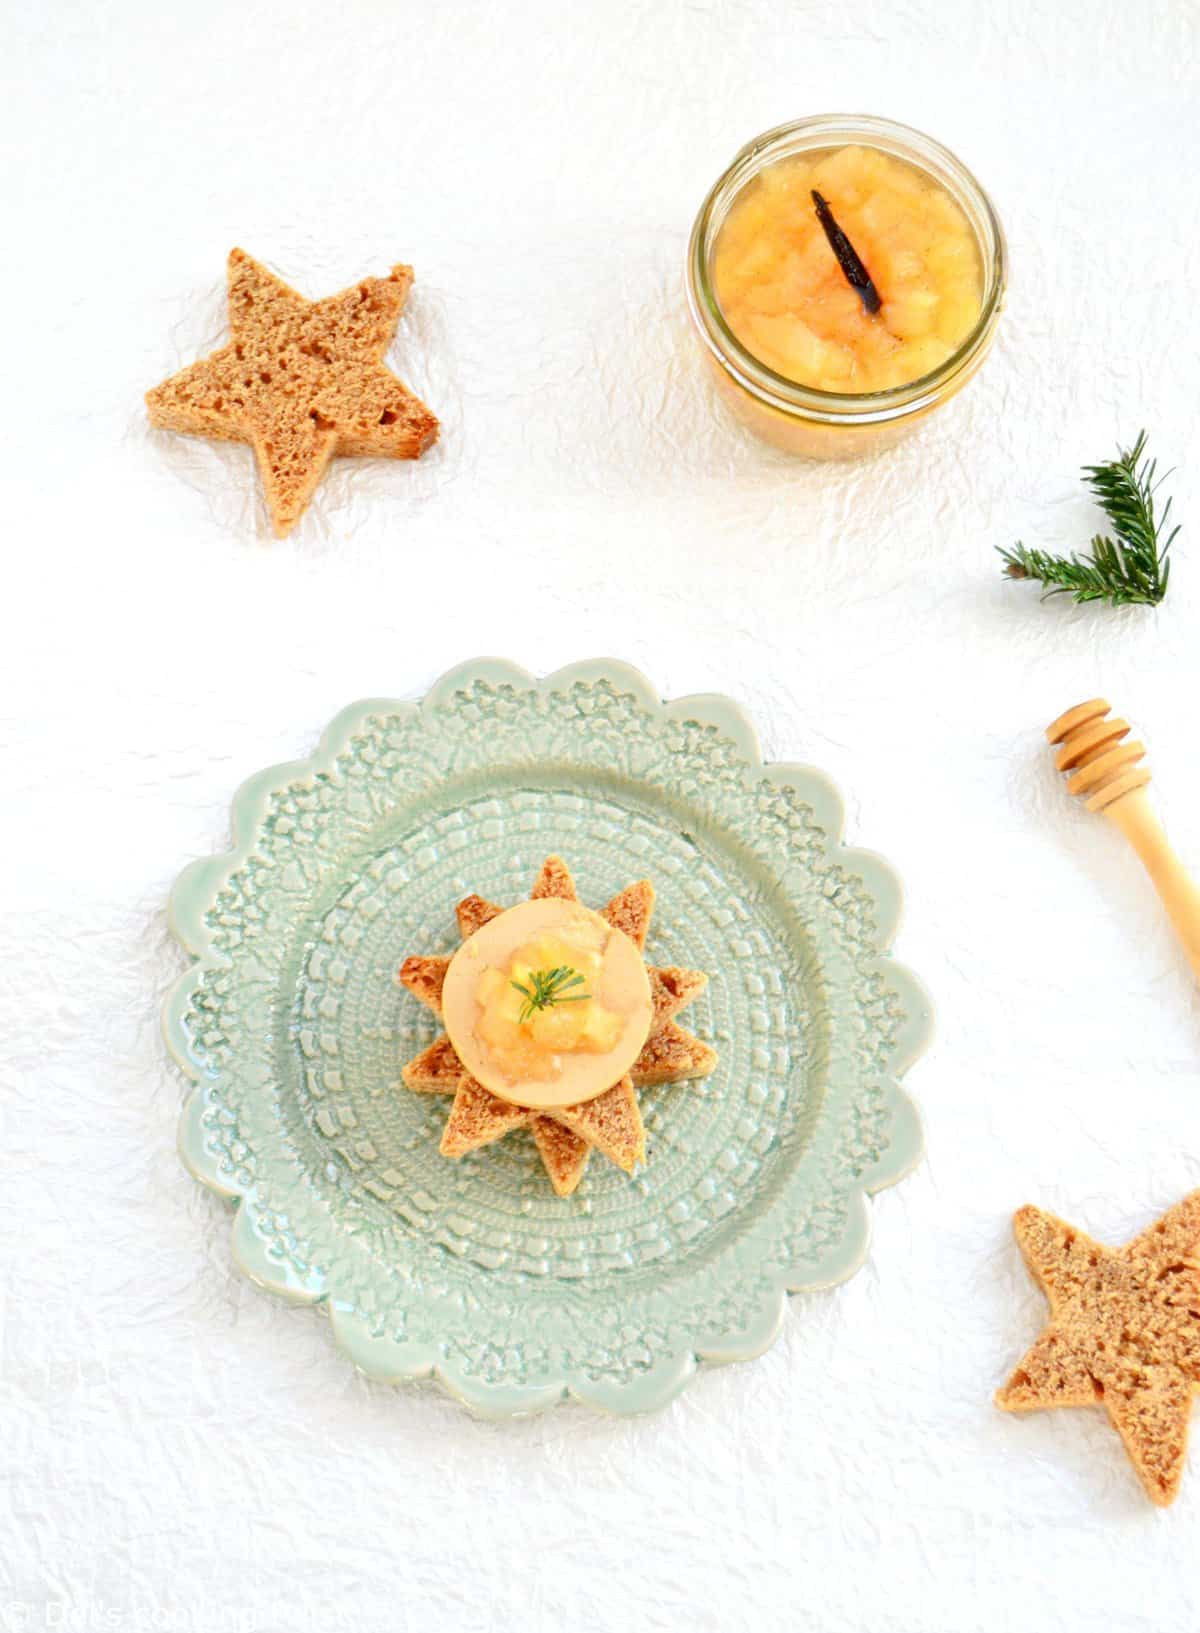 Star-Shaped Gingerbread with Foie Gras and Pear Confit